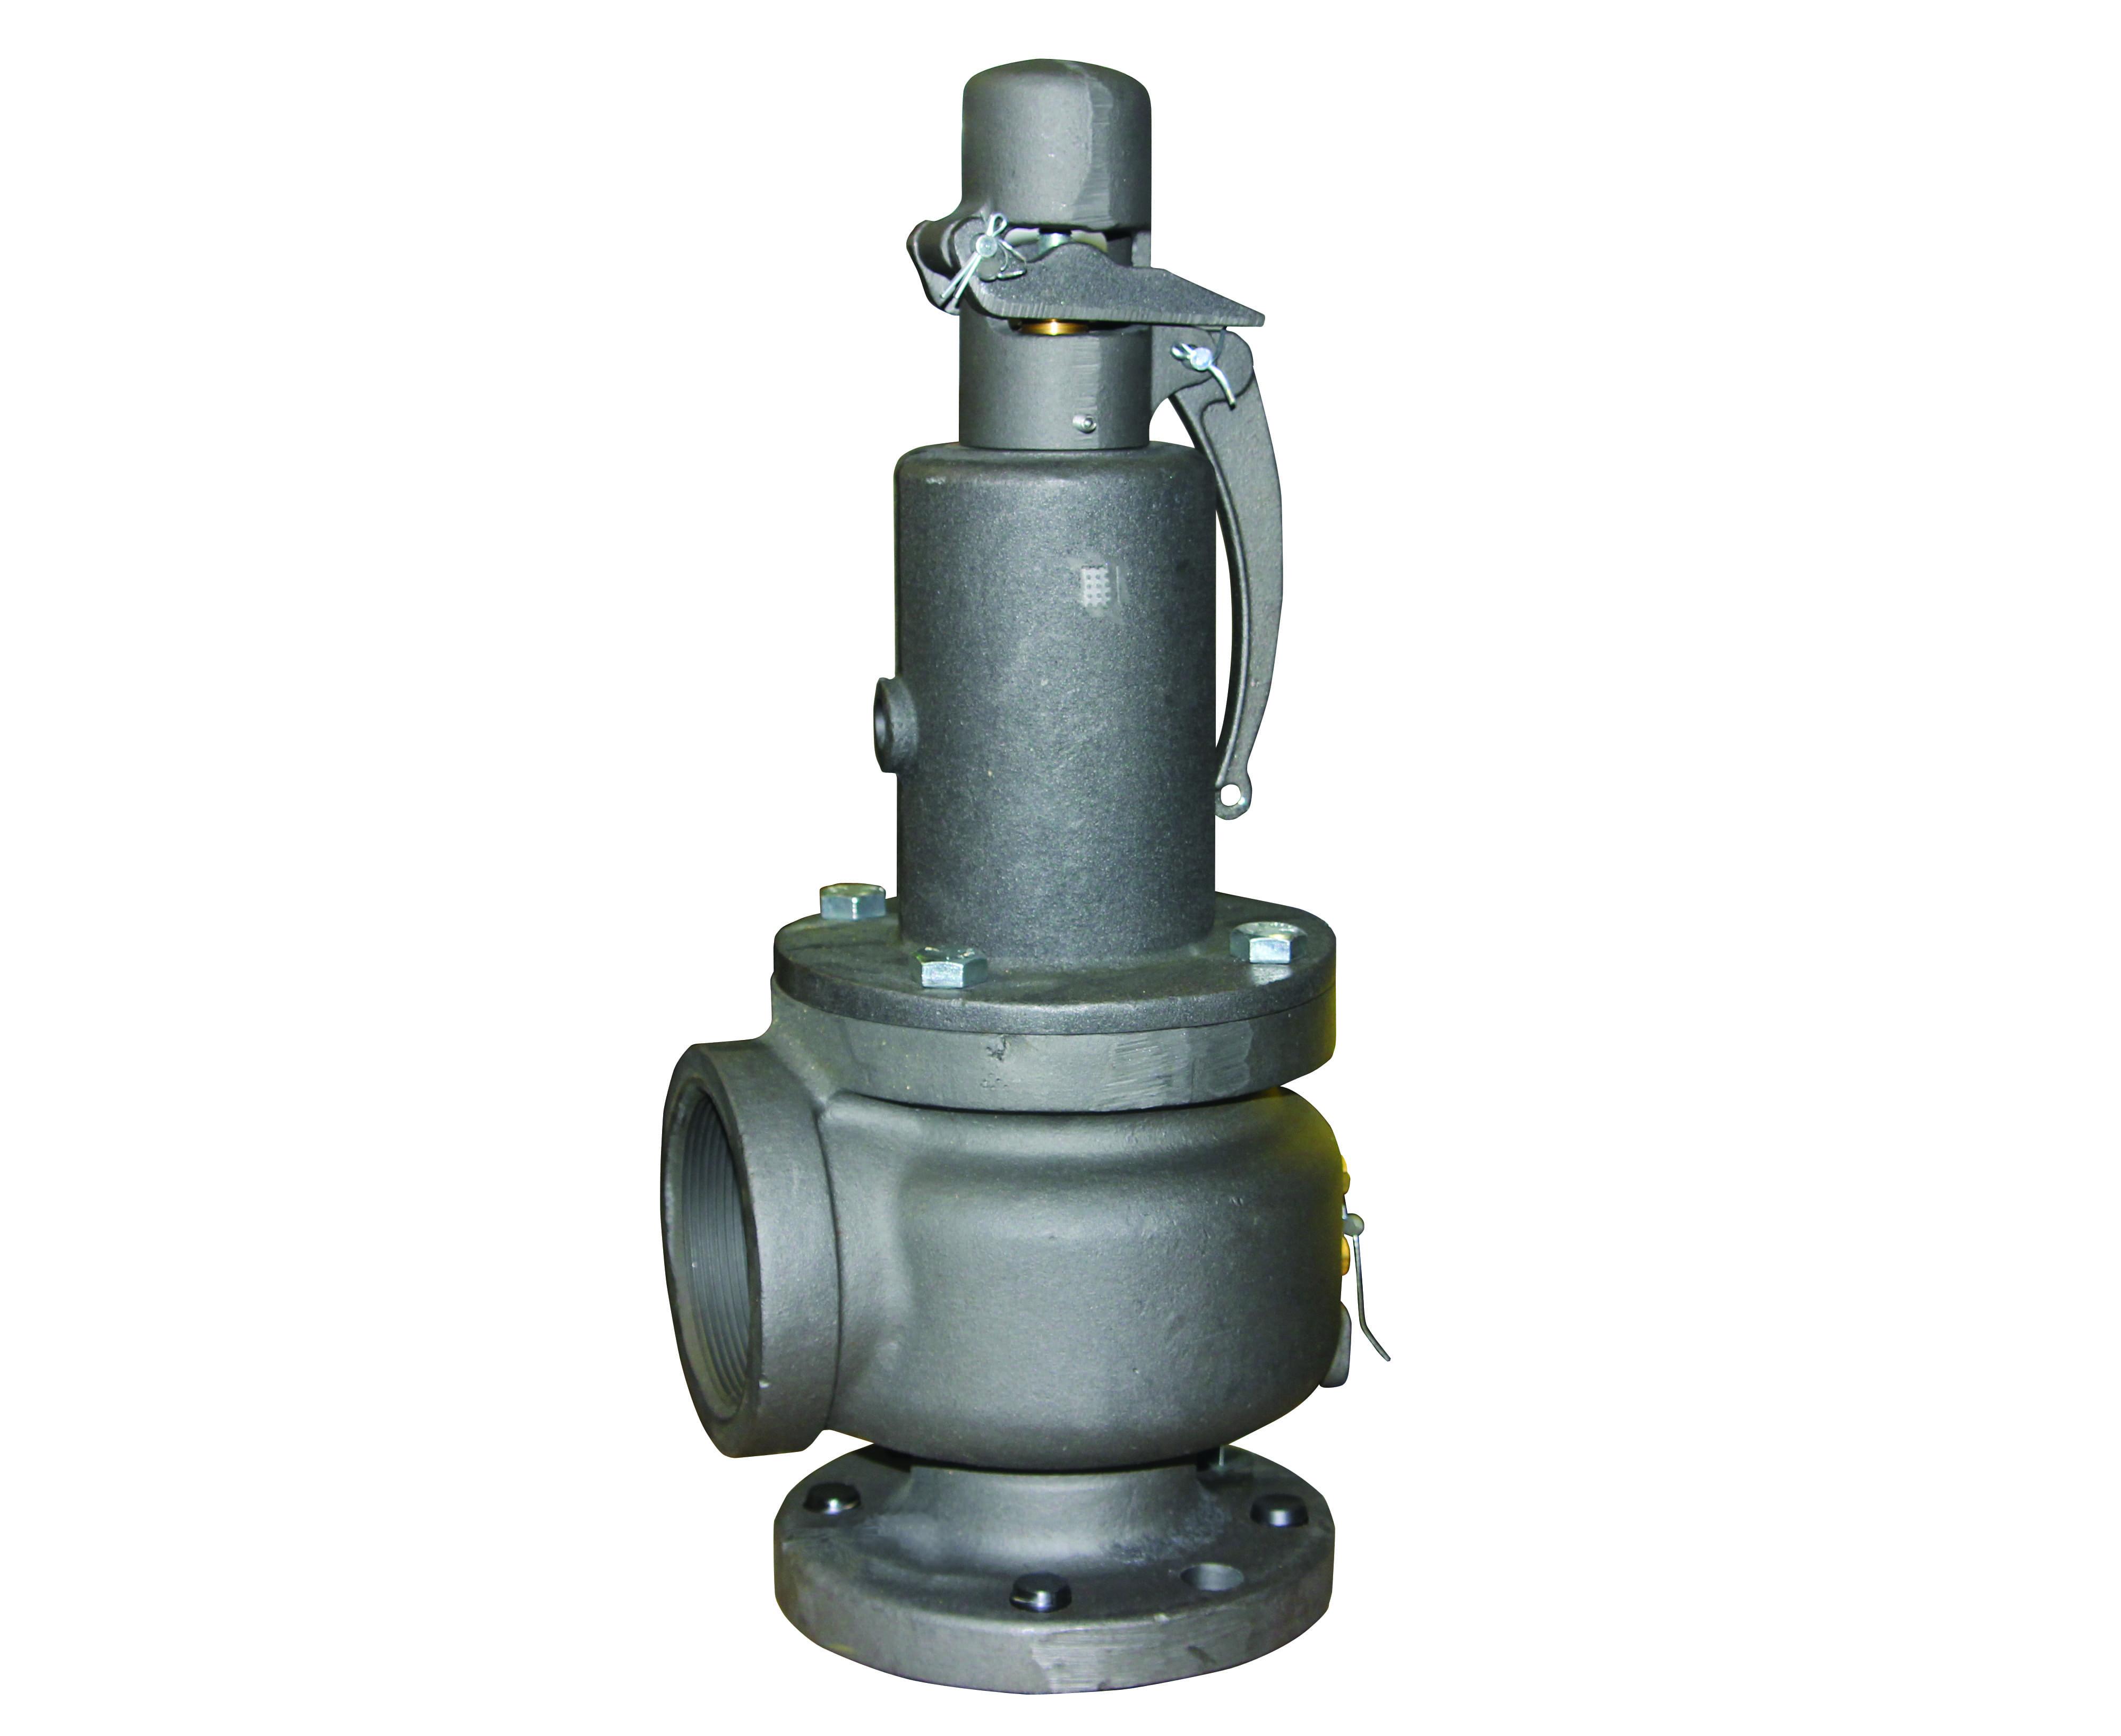 Preview image for Apollo ASME Section VIII Air Cast Iron Safety Relief Valve, 3" X 4" (2 x FNPT)